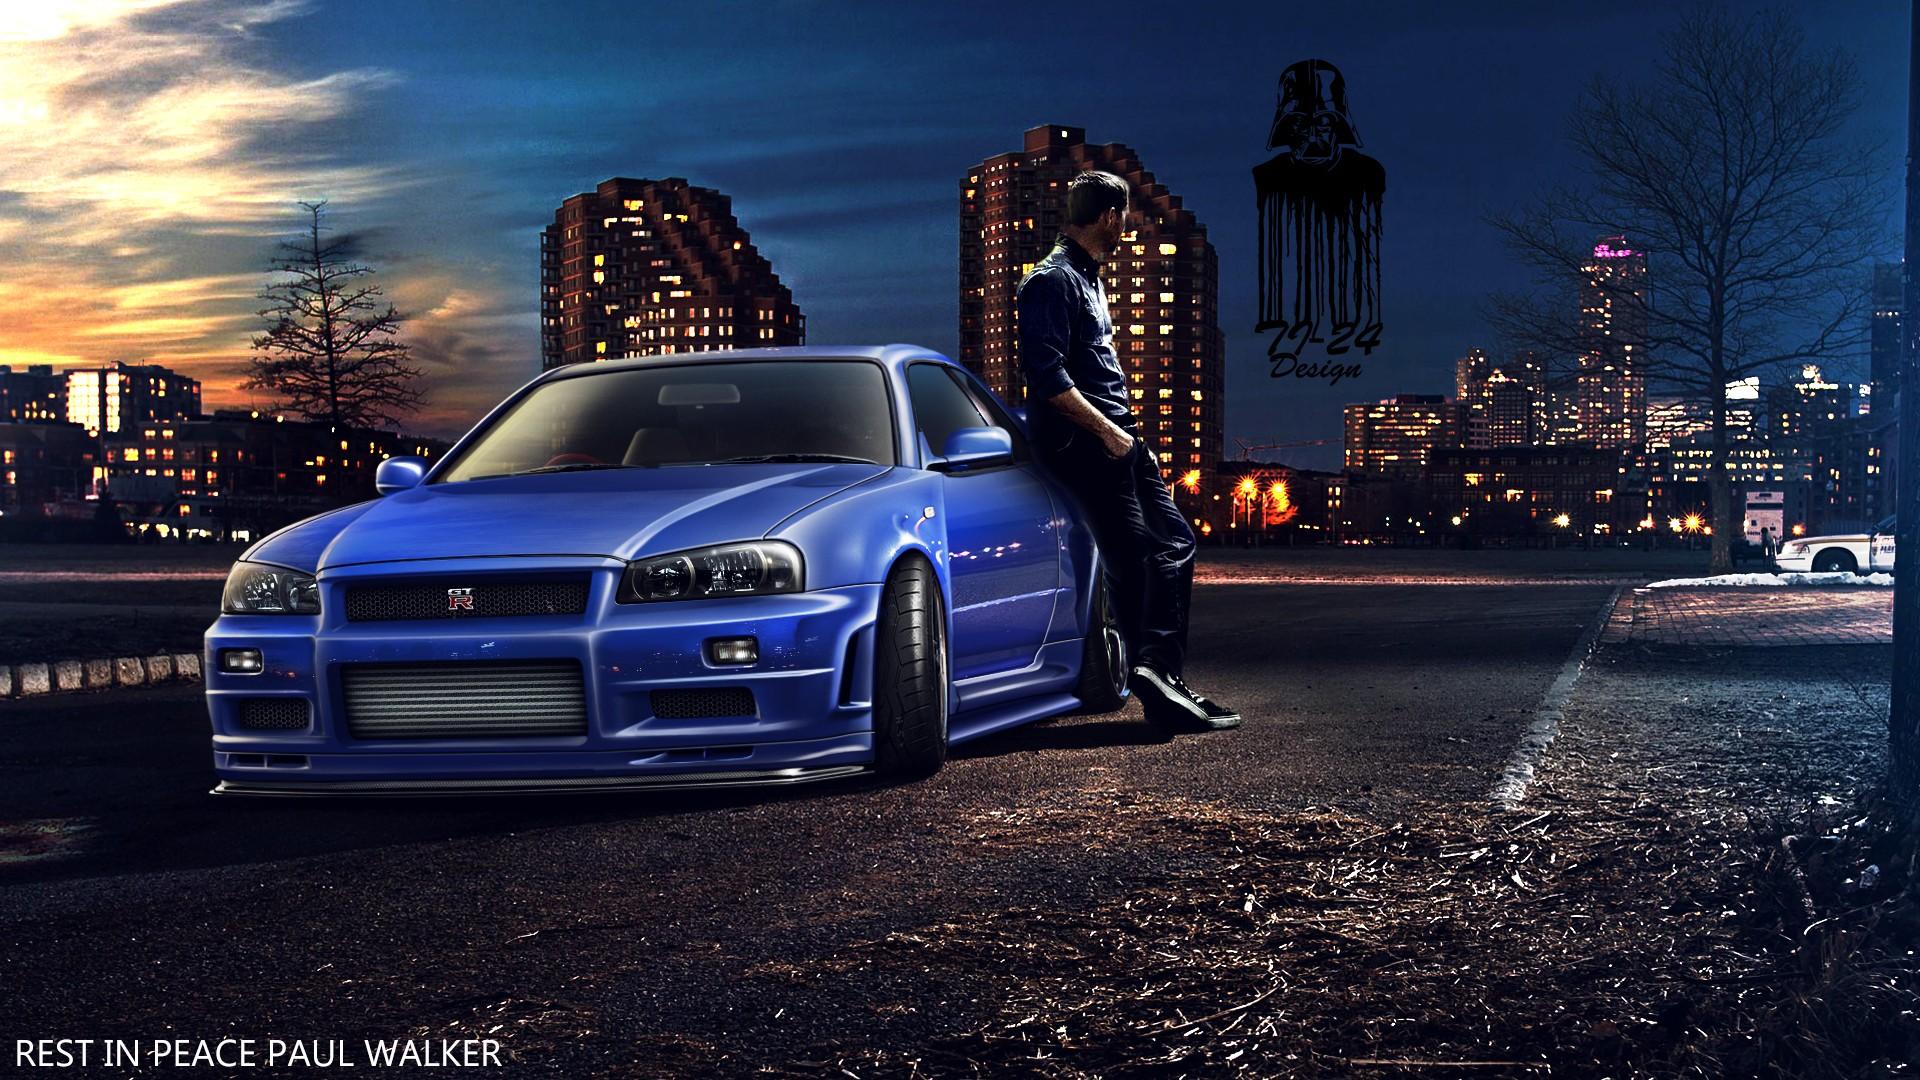 Paul Walker, Fast And Furious, Furious Nissan Skyline GT R R34 Wallpaper HD / Desktop and Mobile Background